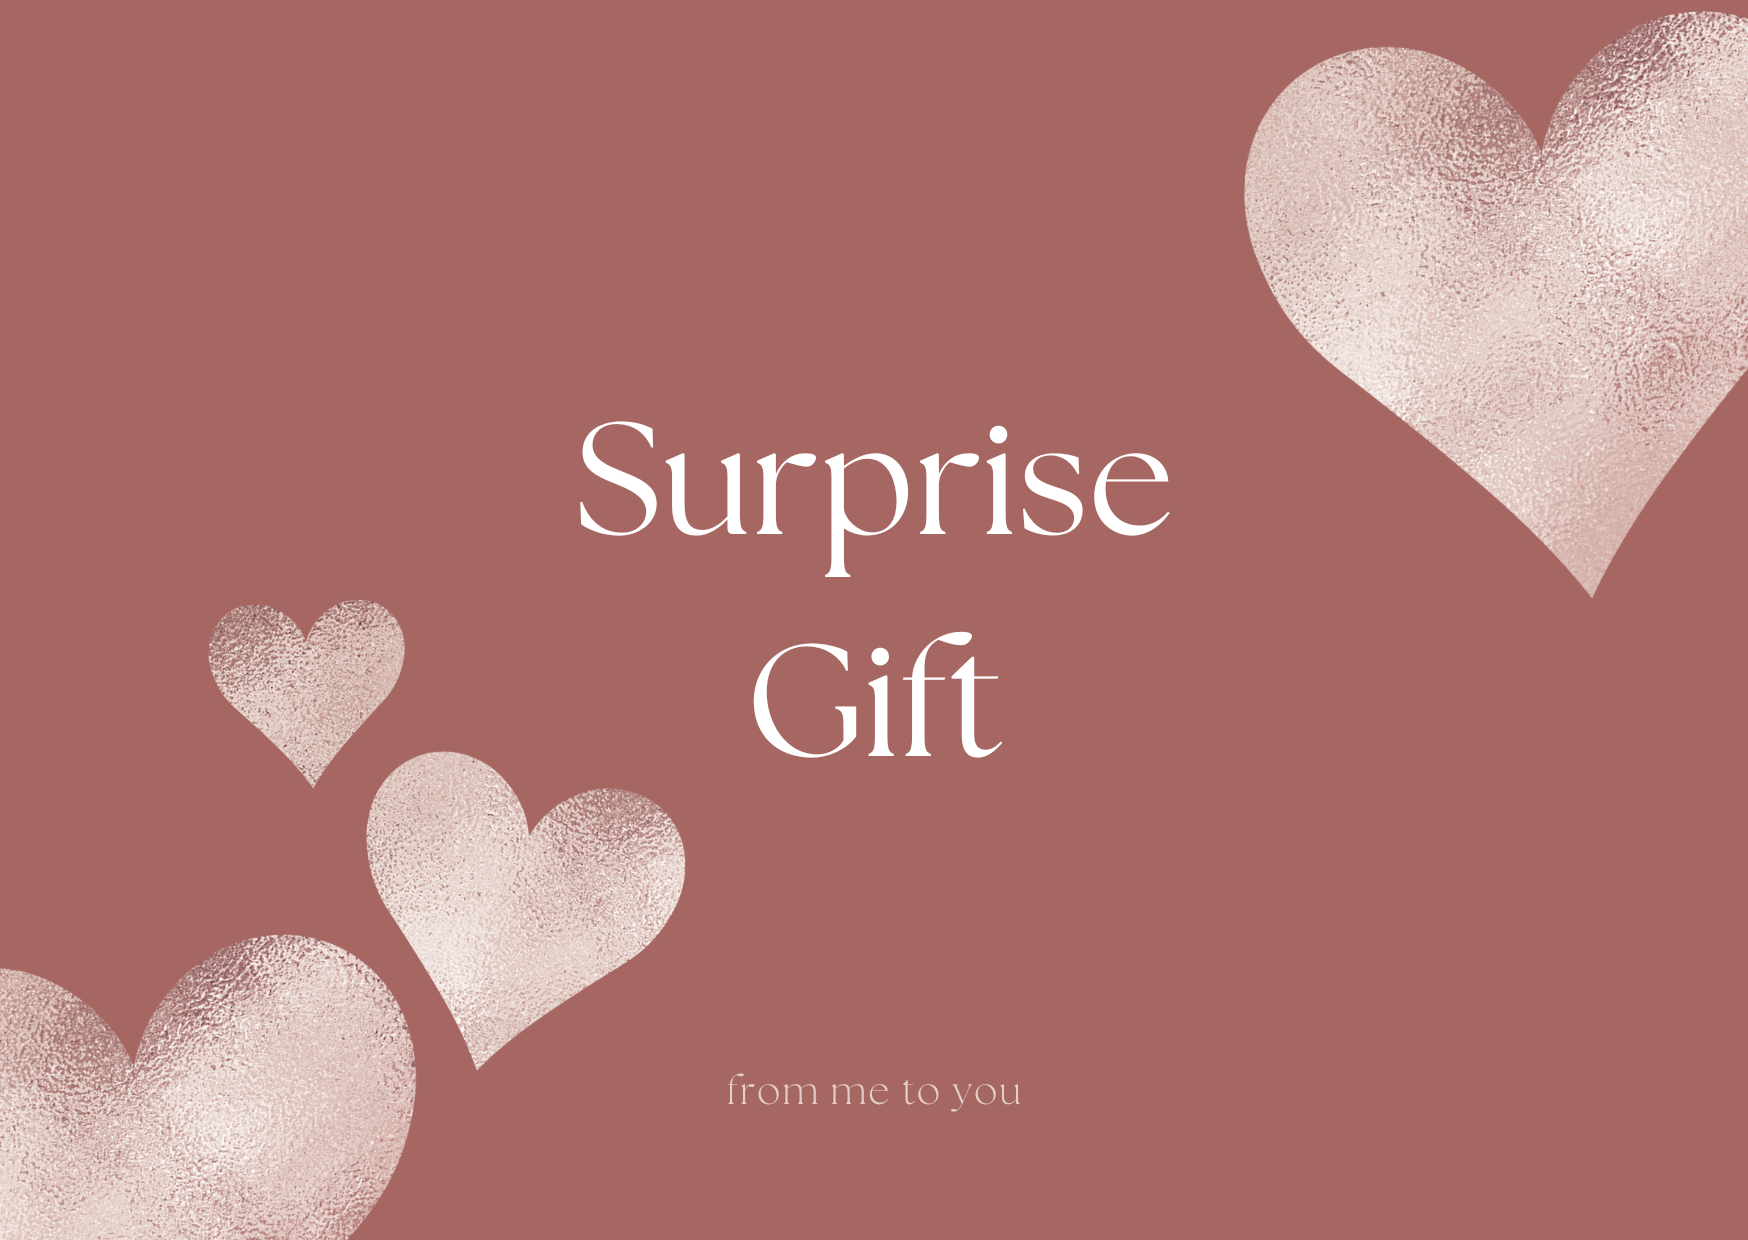 Surprise Gift Card